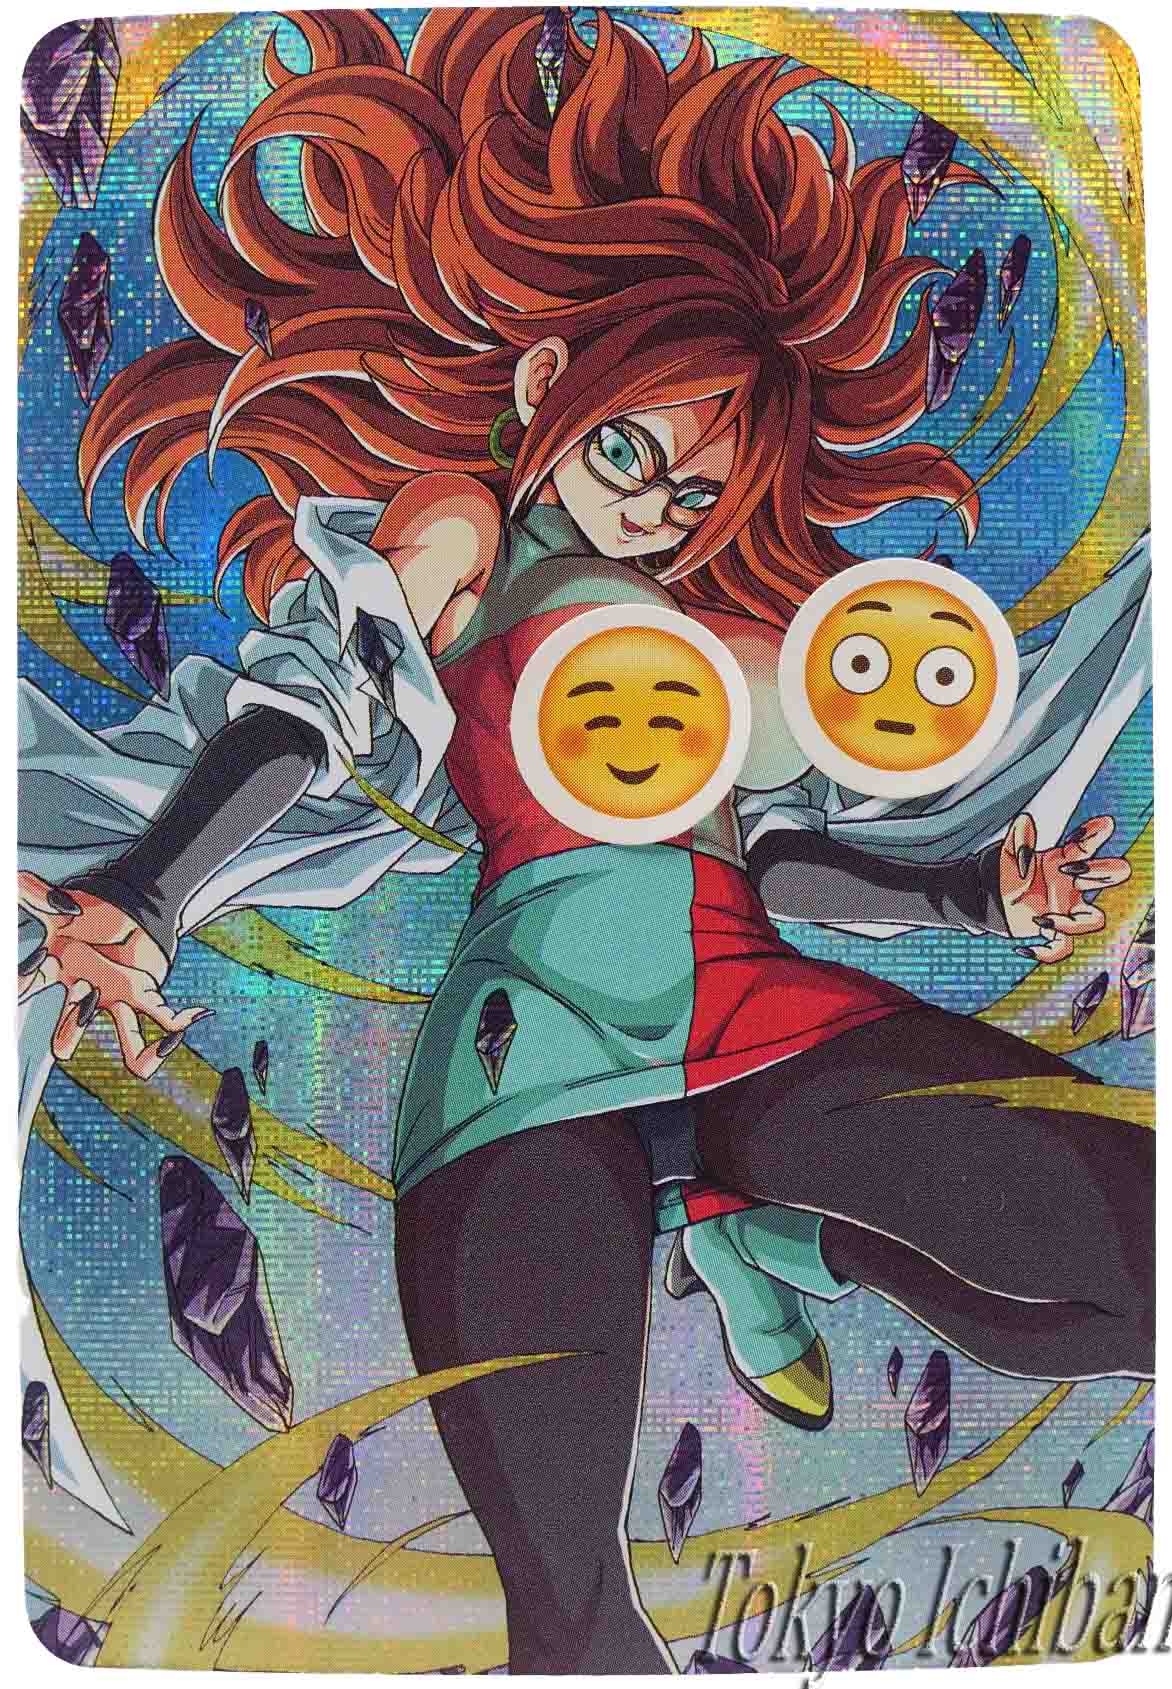 Android 21 Sexy